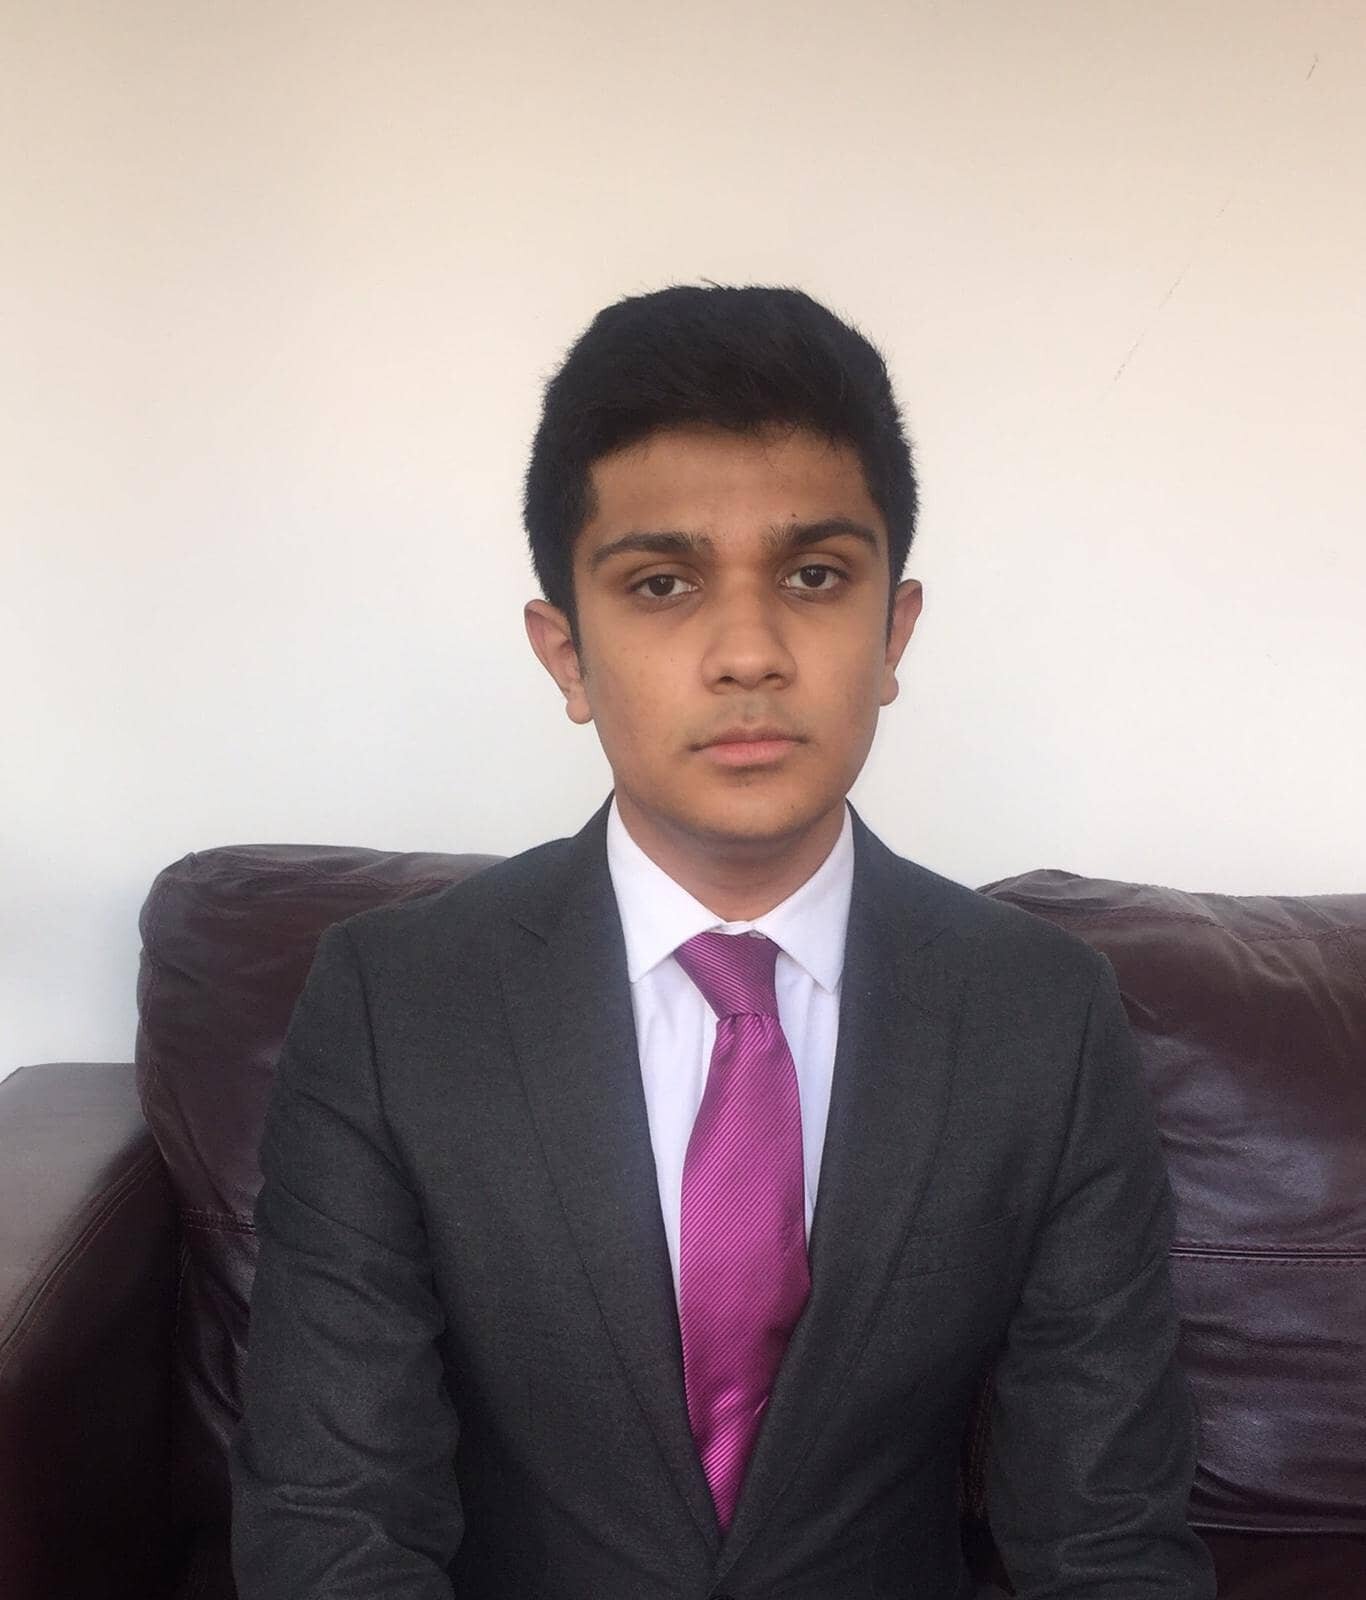 🚺🚹MEET OUR YOUNG LEADERS: Fardeen 'I'm Fardeen, an incoming BSc Economics undergraduate at LSE. I&rsquo;m excited to give back to the community and I do enjoy working with people of my own age. Otherwise I like learning Spanish in my spare time.' 
